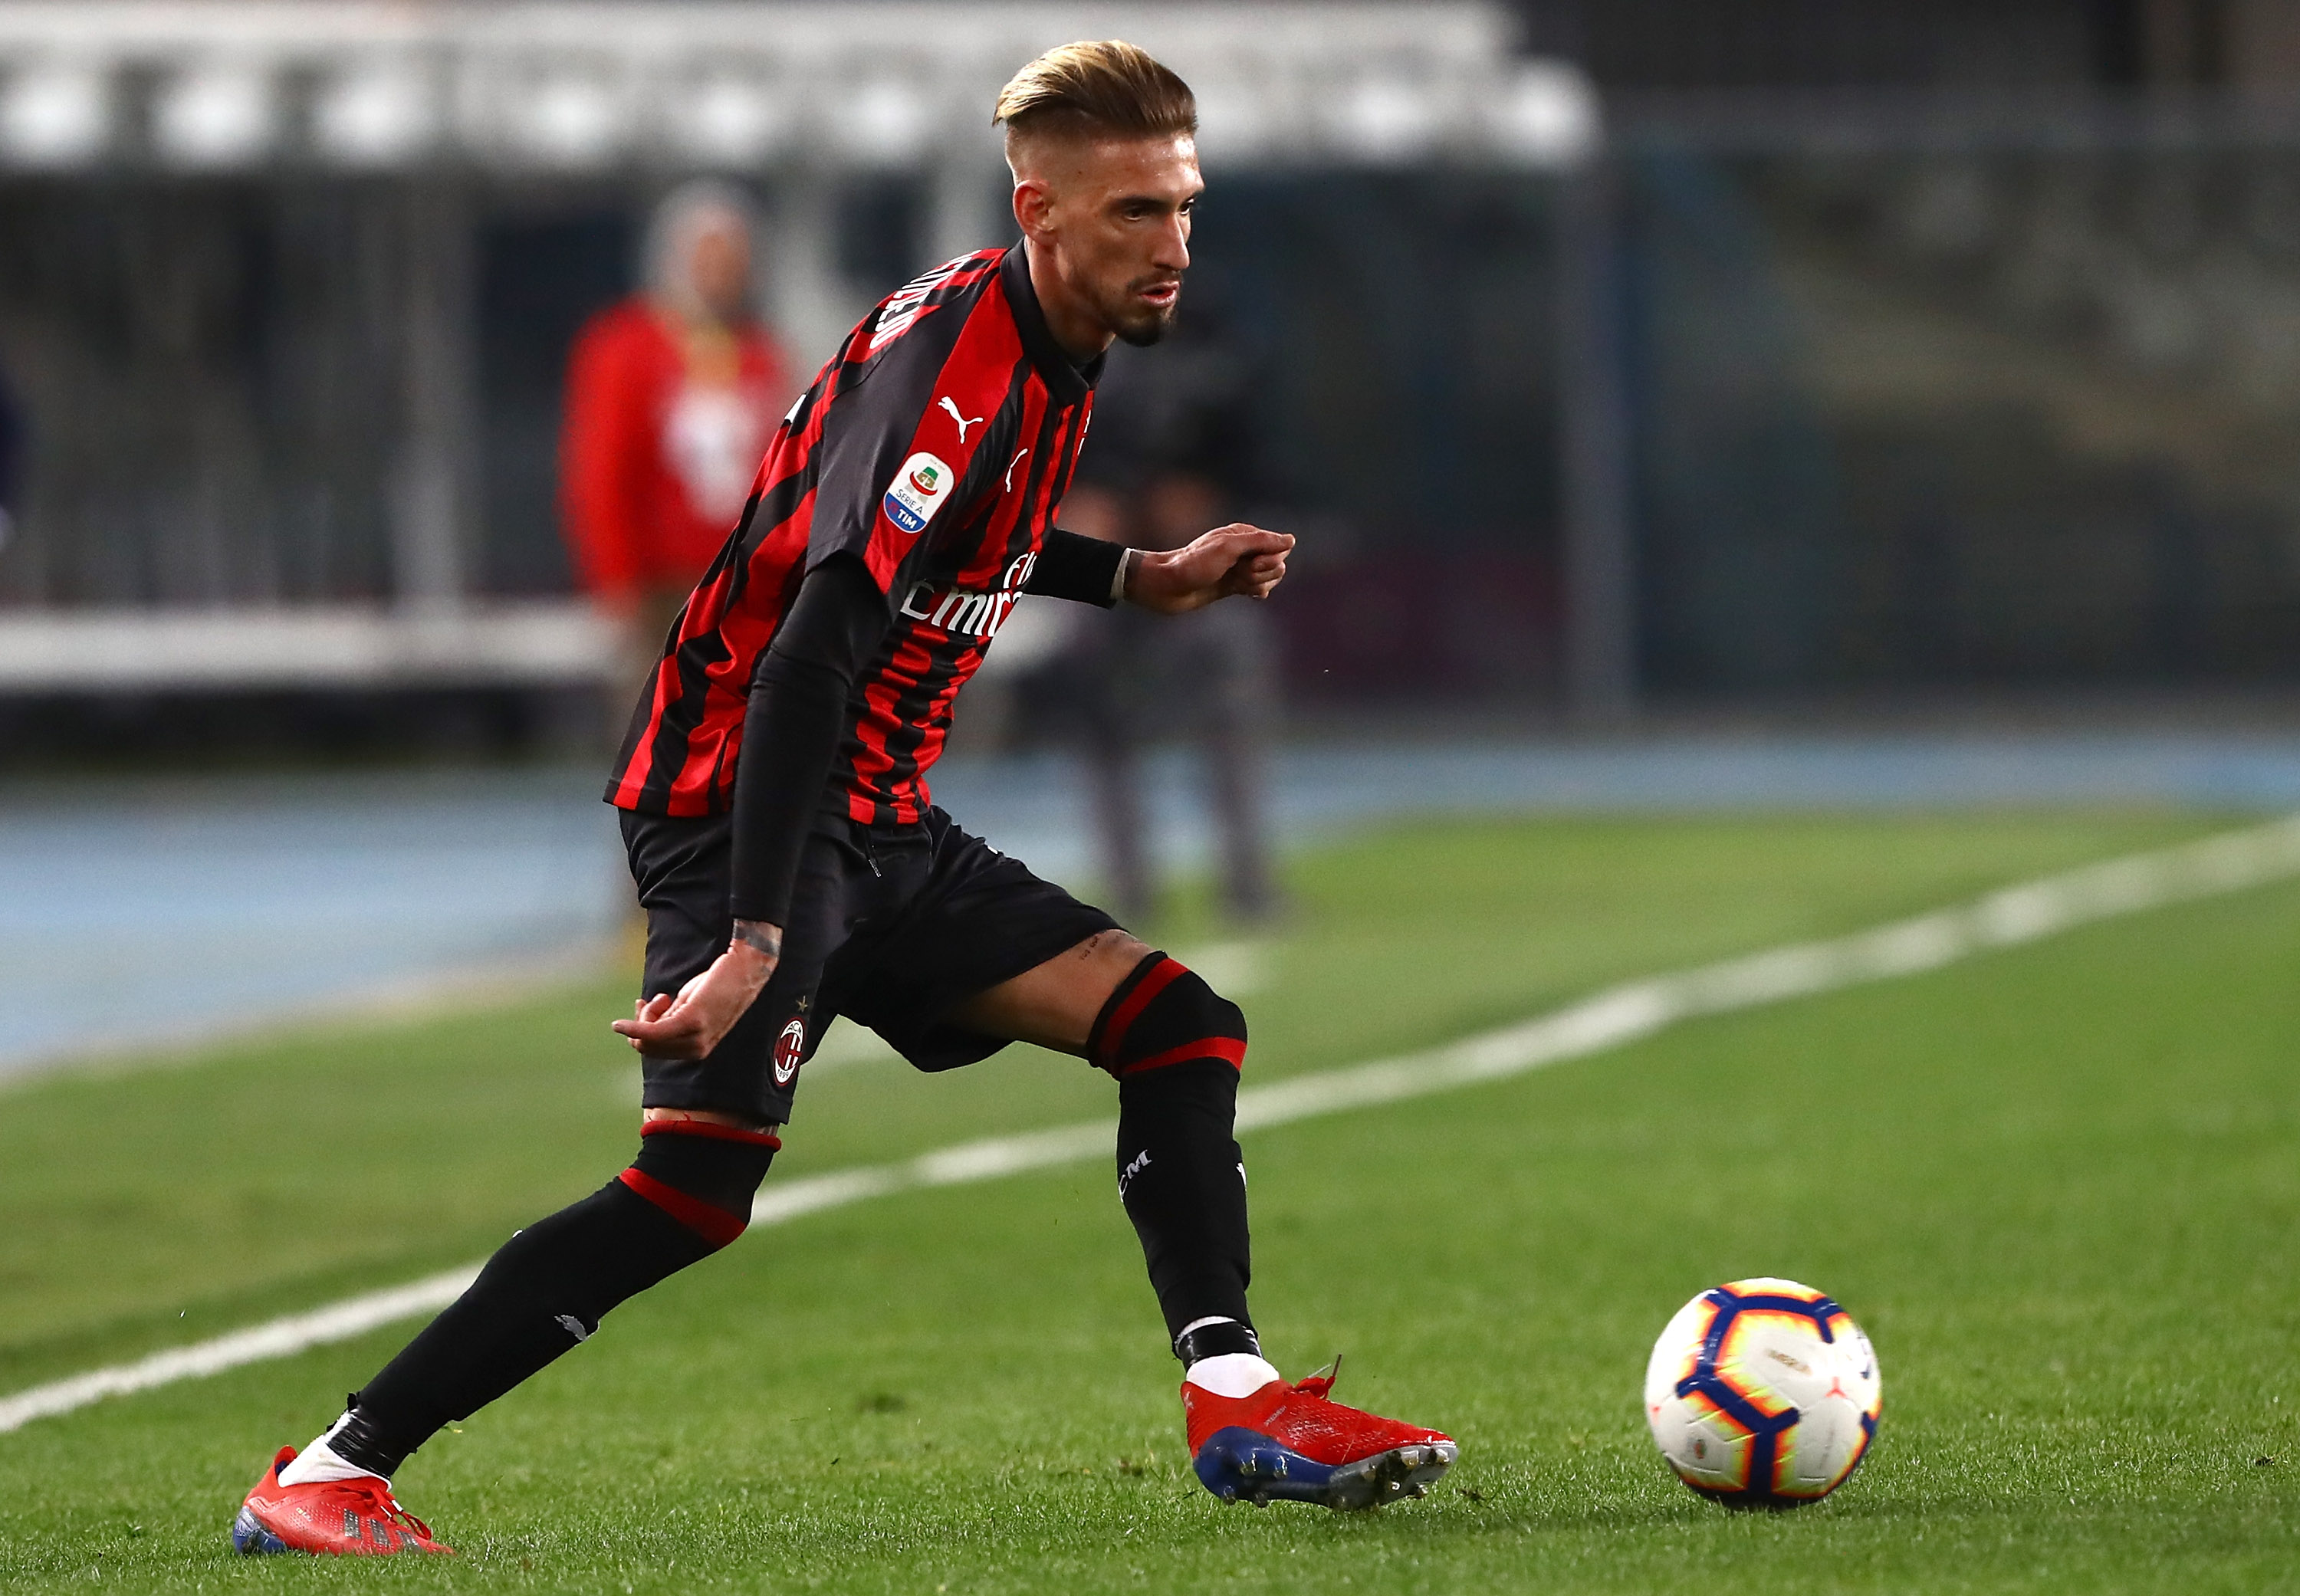 VERONA, ITALY - MARCH 09:  Samuel Castillejo of AC Milan in action during the Serie A match between Chievo Verona and AC Milan at Stadio Marc'Antonio Bentegodi on March 9, 2019 in Verona, Italy.  (Photo by Marco Luzzani/Getty Images)